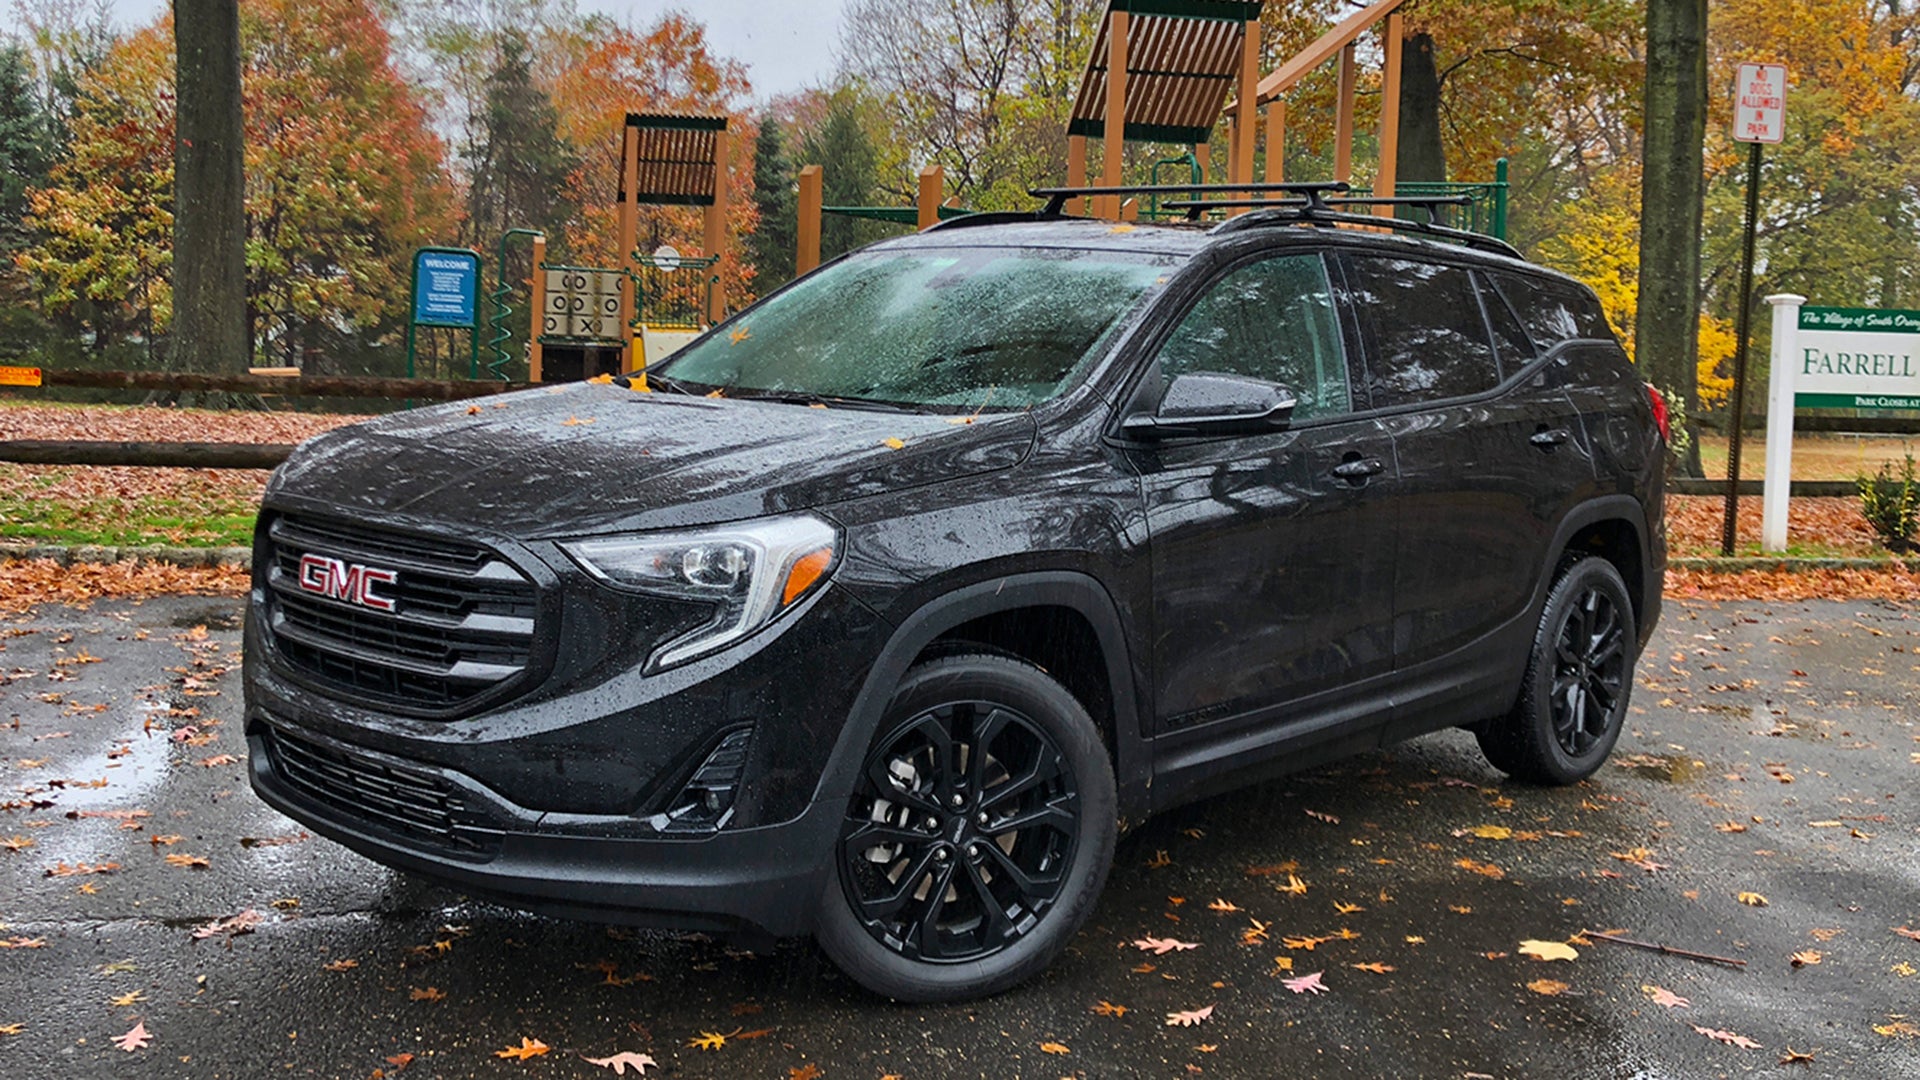 2019 GMC Terrain AWD SLT Black Edition Review: All Black Everything in a  Compact Utility Package